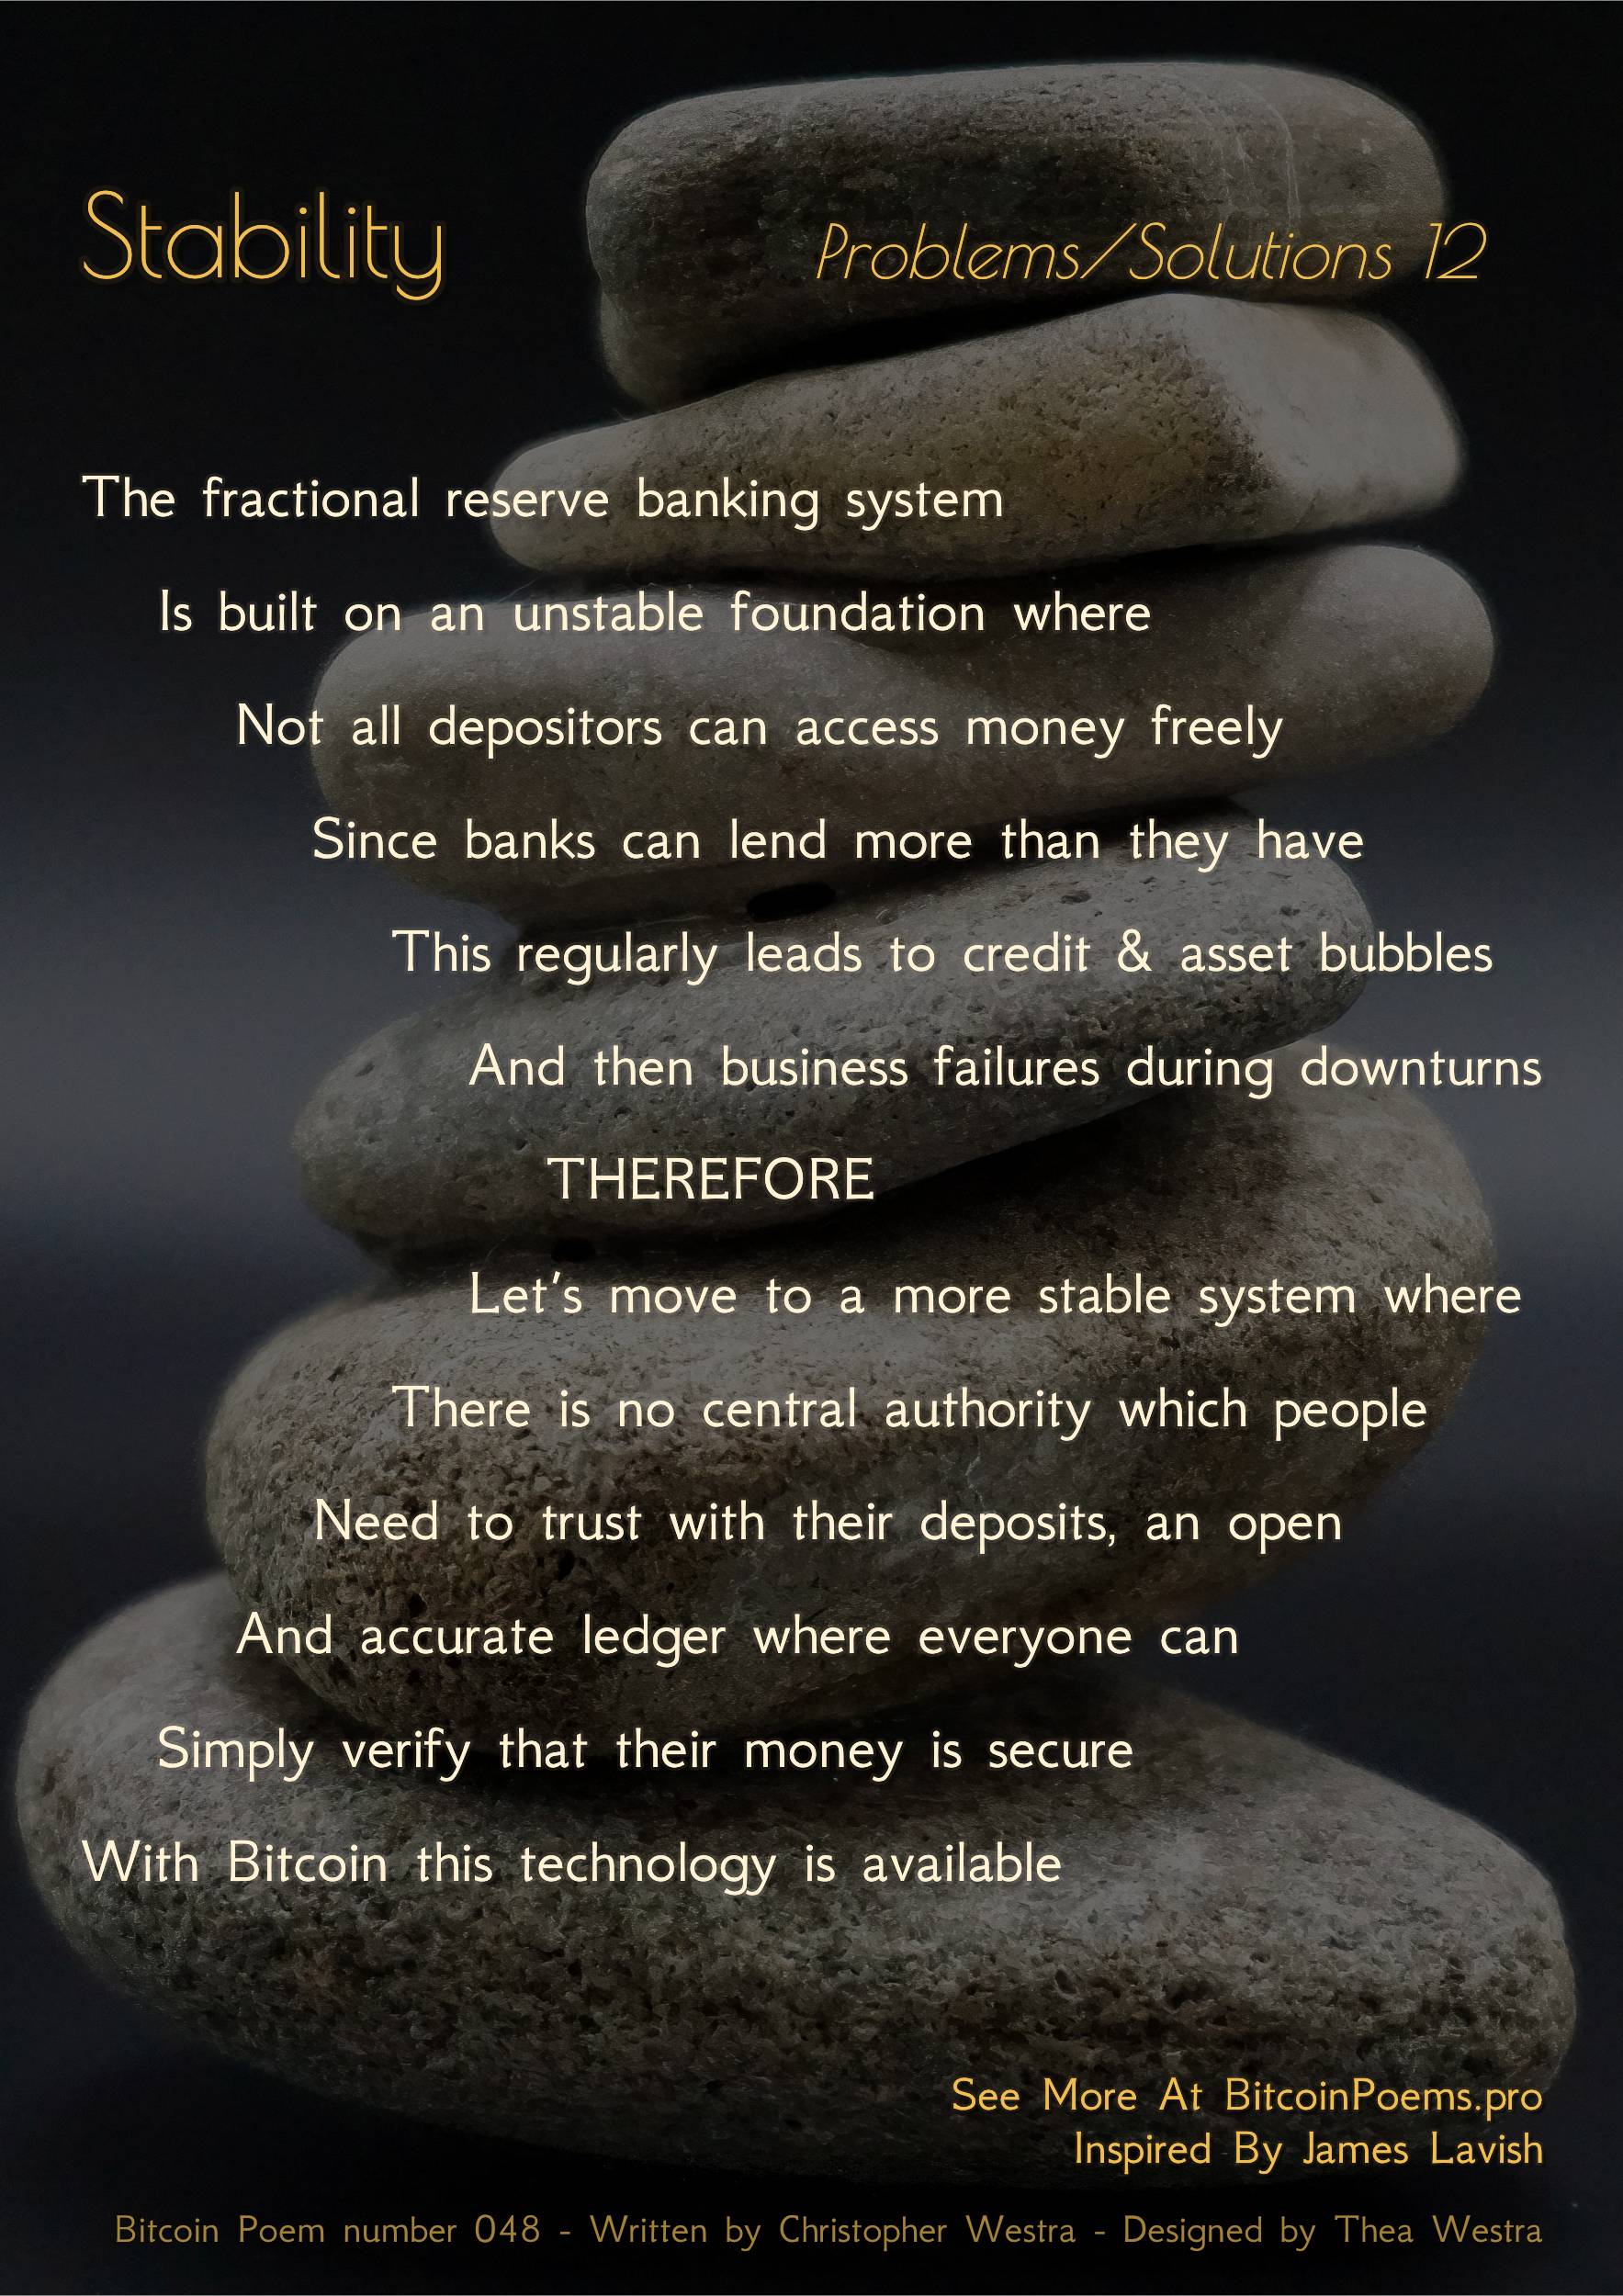 Stability - Bitcoin Poem 048 by Christopher Westra